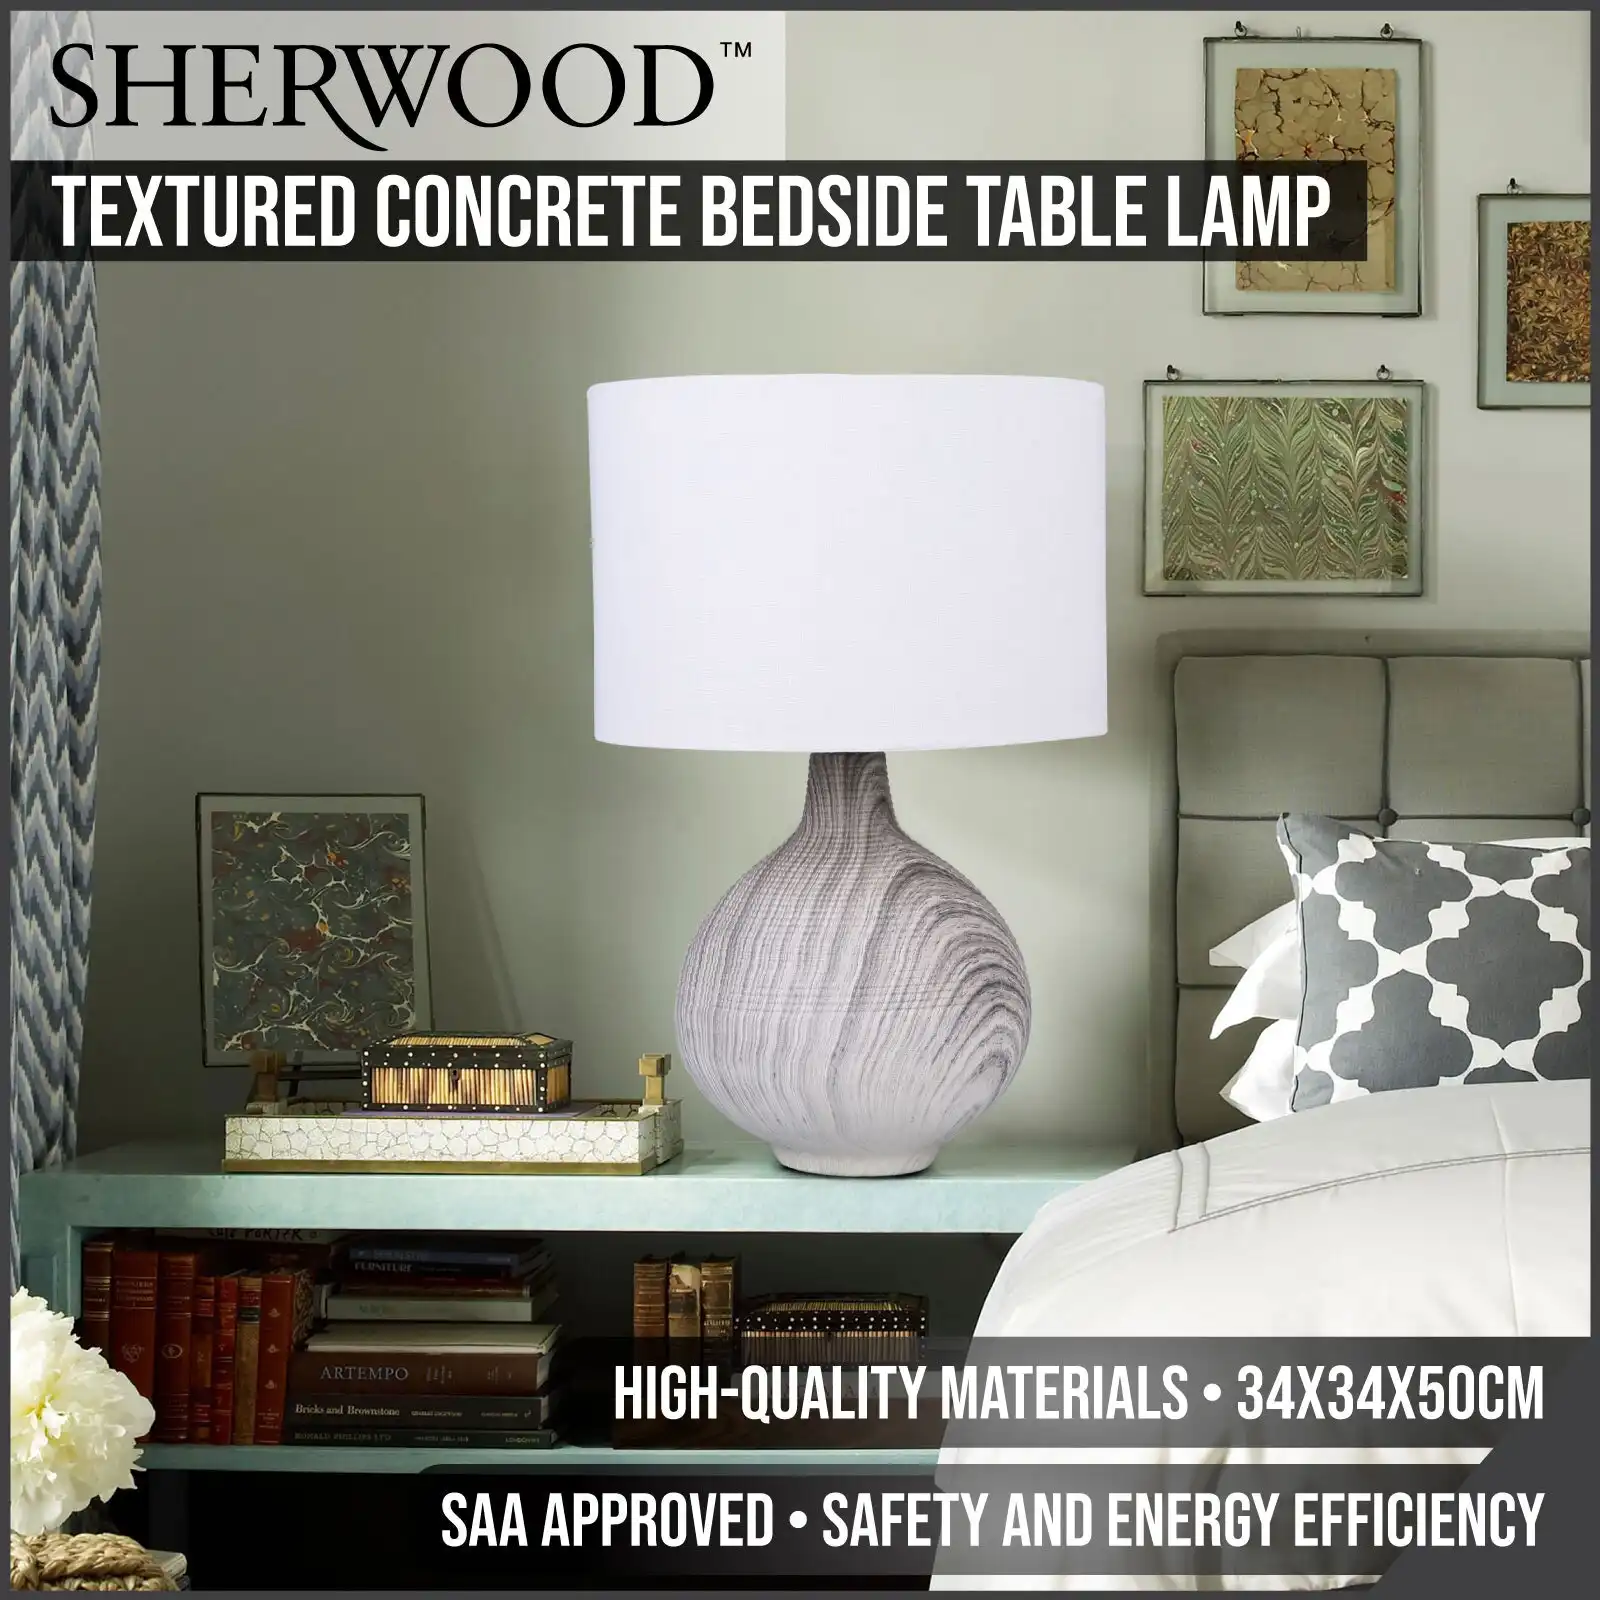 Sherwood Lighting Textured Concrete Bedside Table Lamp - White Shade